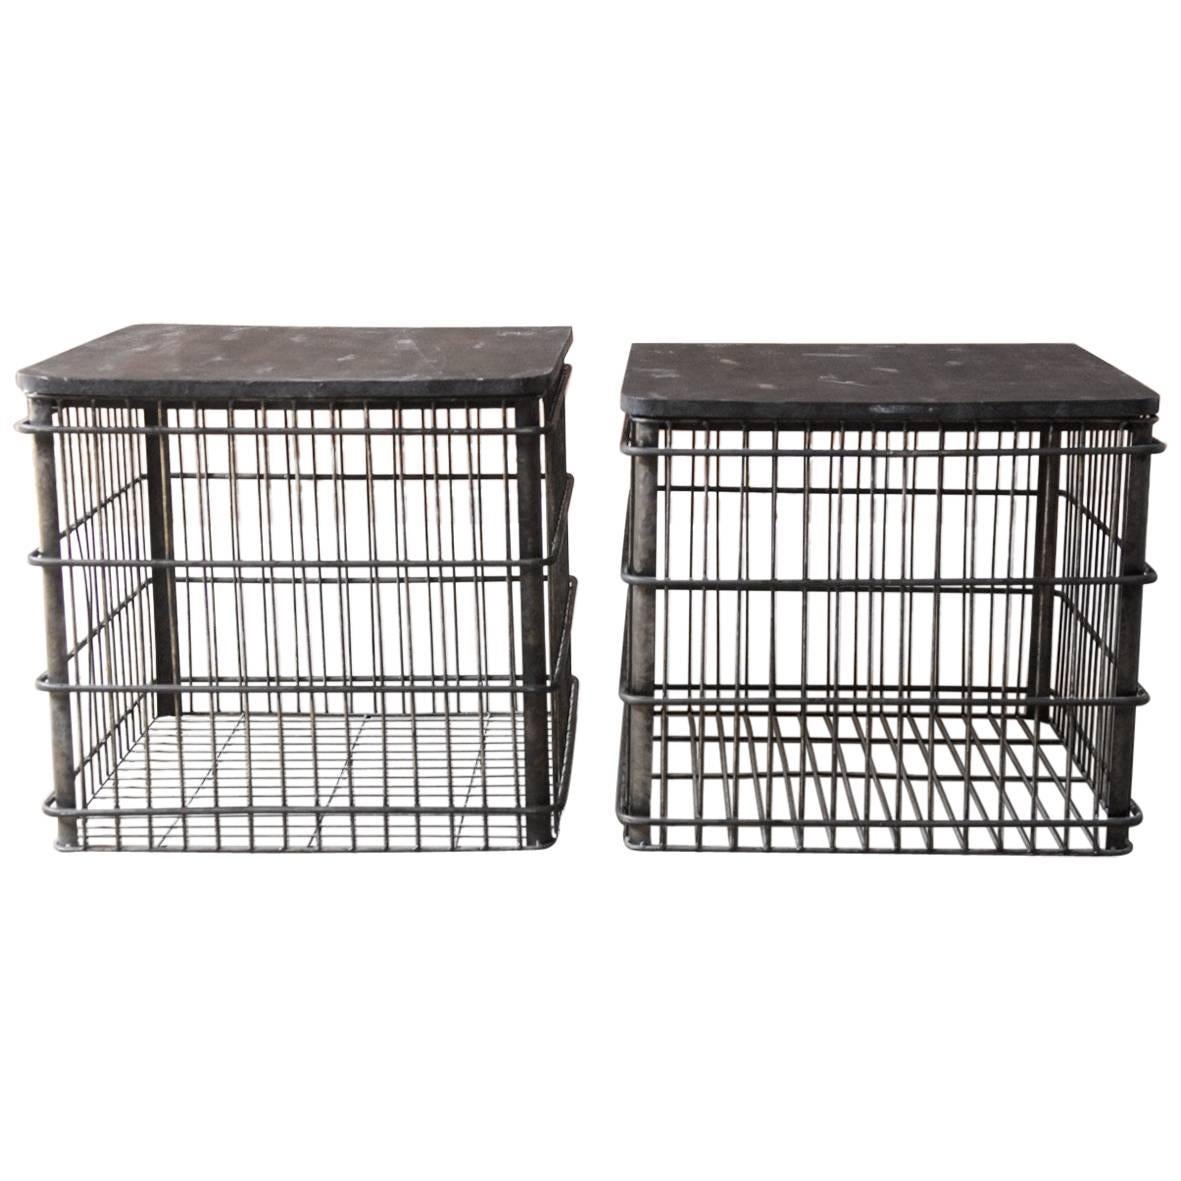 Pair of Metal Industrial Style Shipping Bin Side Tables